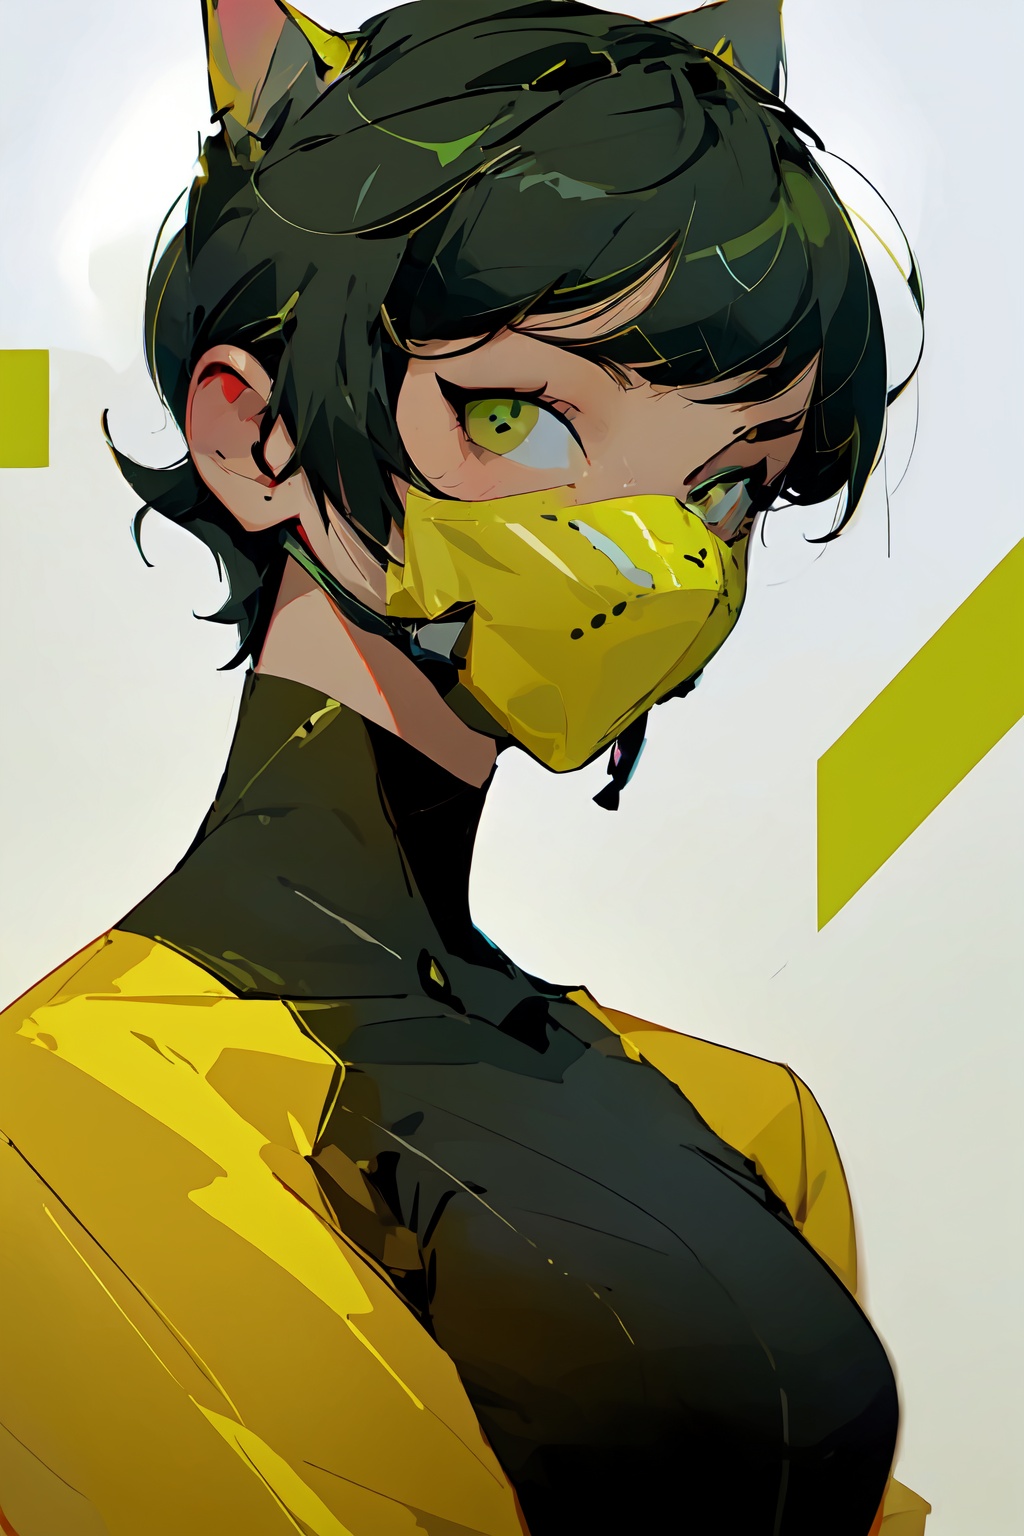  A girl with short hair, big eyes, delicate facial features, magazine pose, trend, cool, fluorescent green background, green color scheme, illustrations ,Urban techwear, mask, Slightmuscle, HTTP, Larme Kei3, MinimalistPoster, mt,mt_helmet,mt_jacket,Rabbit ears,mt_Short sleeve, fenhong, 1girl, Yi na si, yinyou,yinyou color